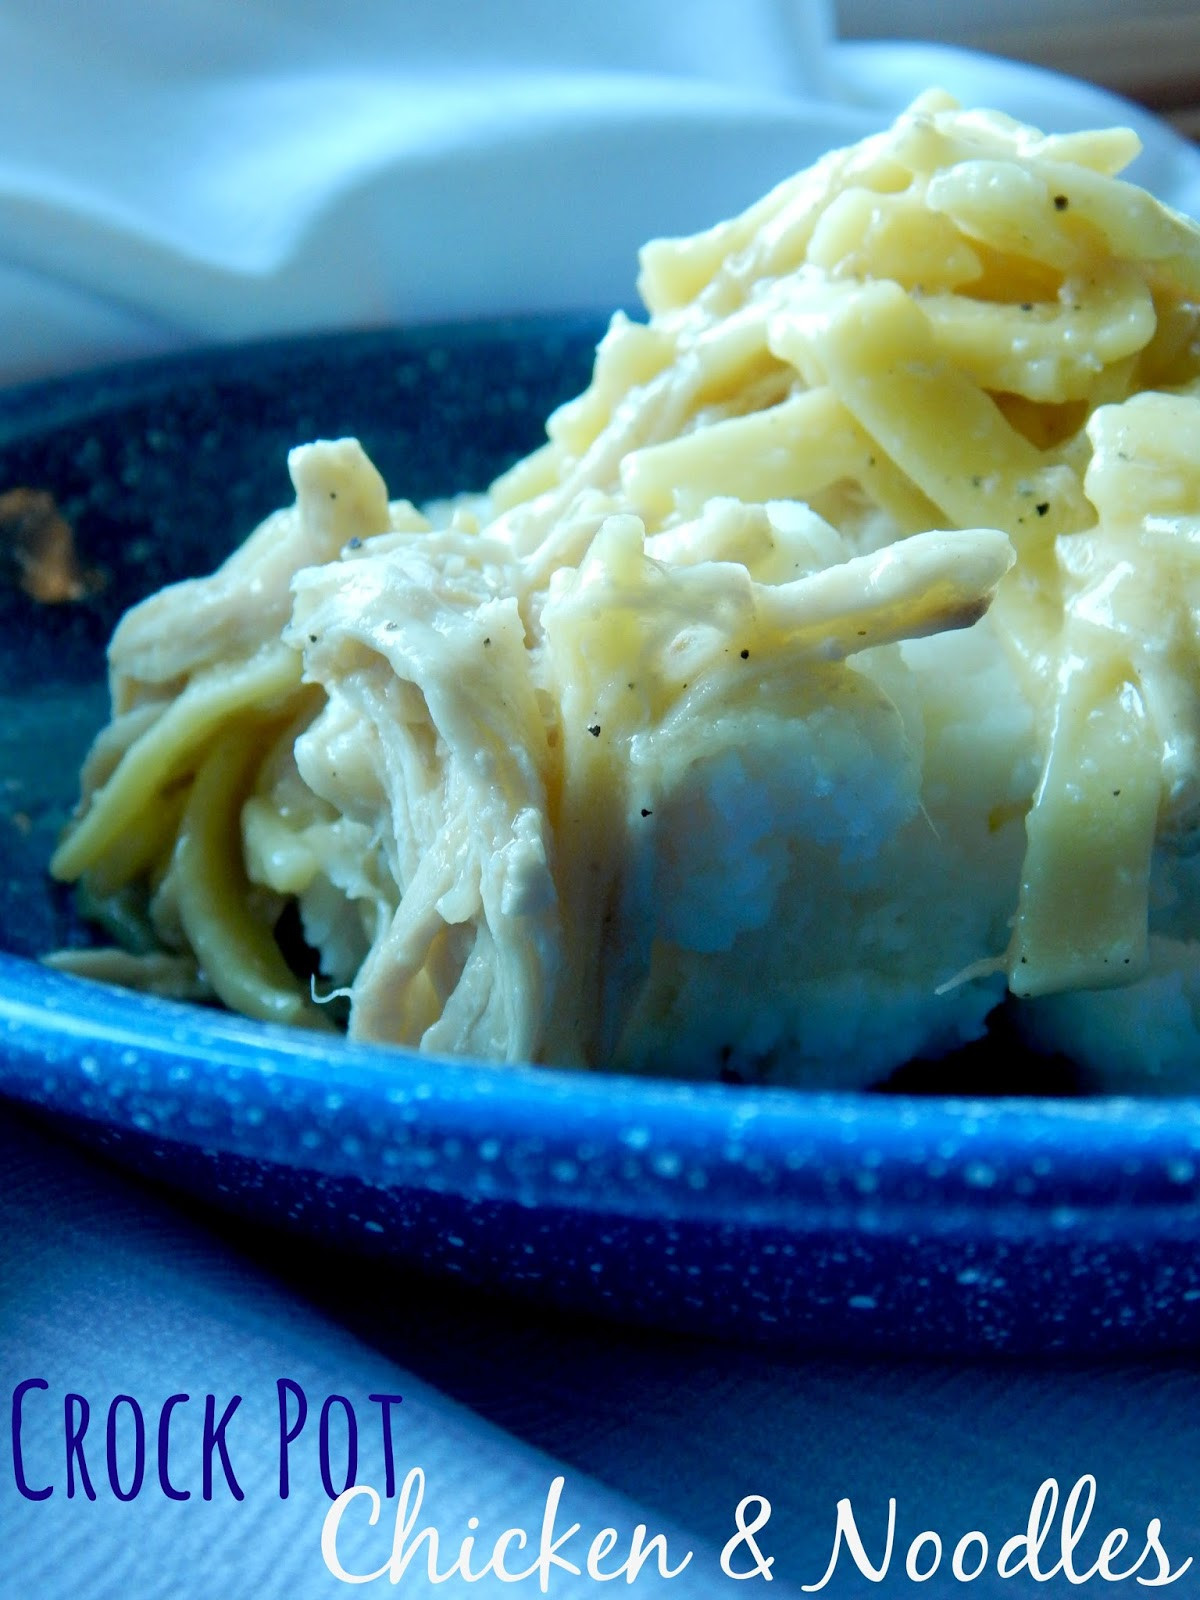 Crock Pot Chicken And Noodles
 Ally s Sweet and Savory Eats Crock Pot Chicken & Noodles